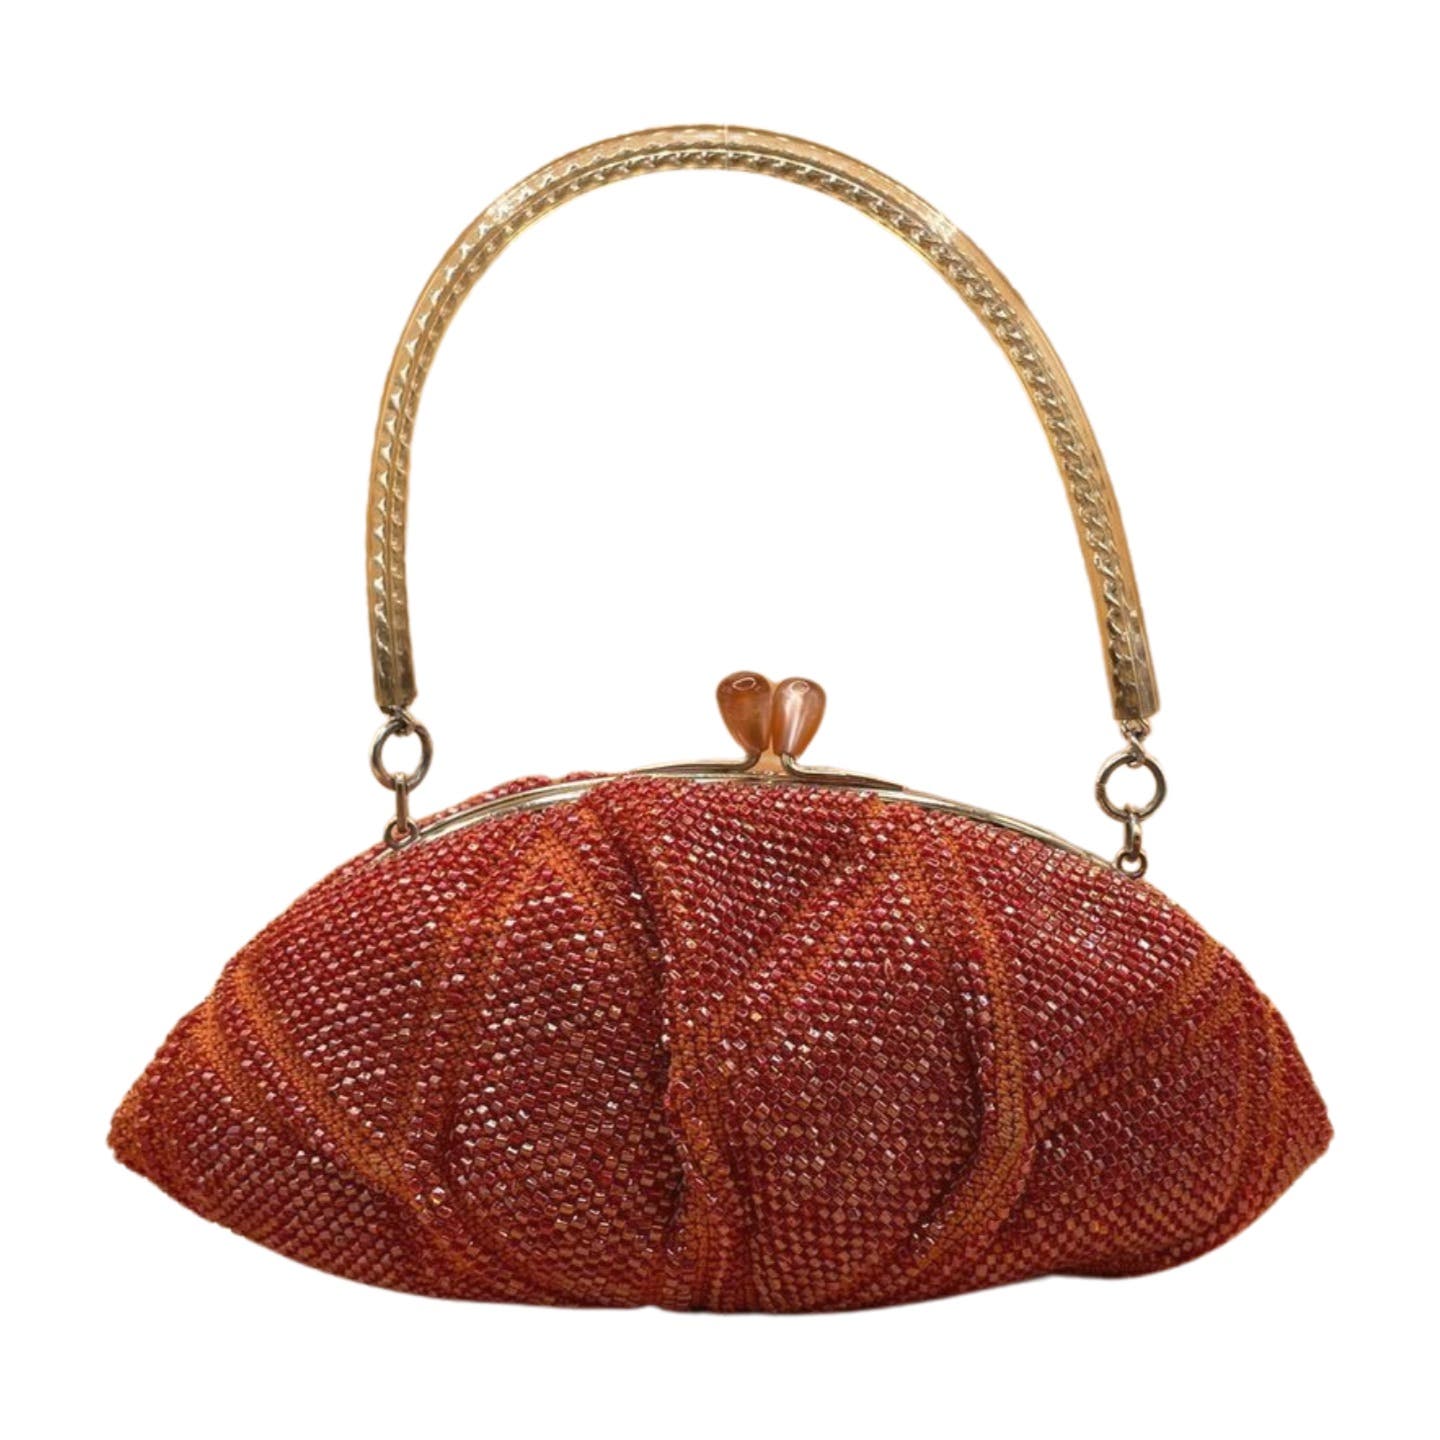 A Vintage Beaded Top Handle Bag in beautiful vintage condition, featuring a decorative clasp and a gold-toned chain handle. The beads form a geometric pattern across the body of the bag, giving this beaded number an elegant, textured appearance.